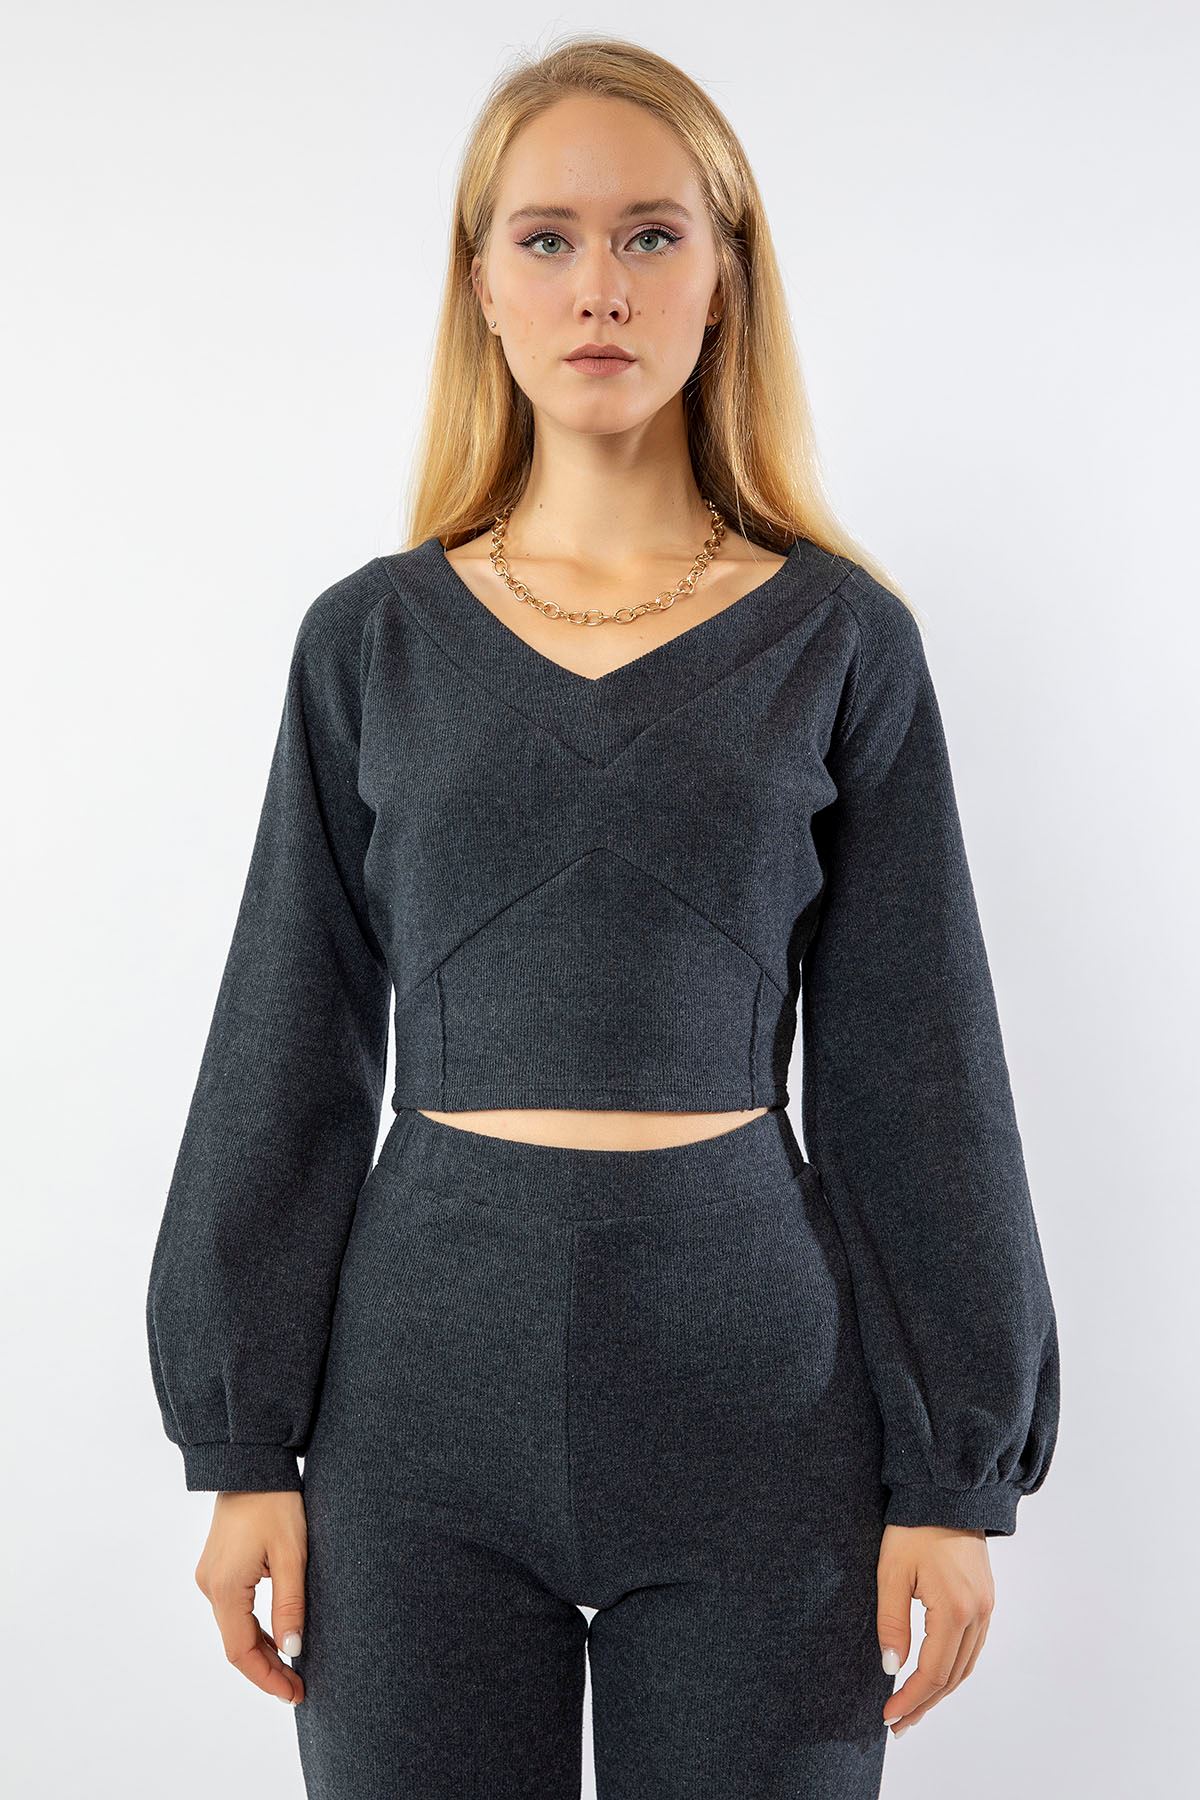 Thessaloniki Knitted Fabric Long Sleeve V-Neck Blouse - Anthracite 